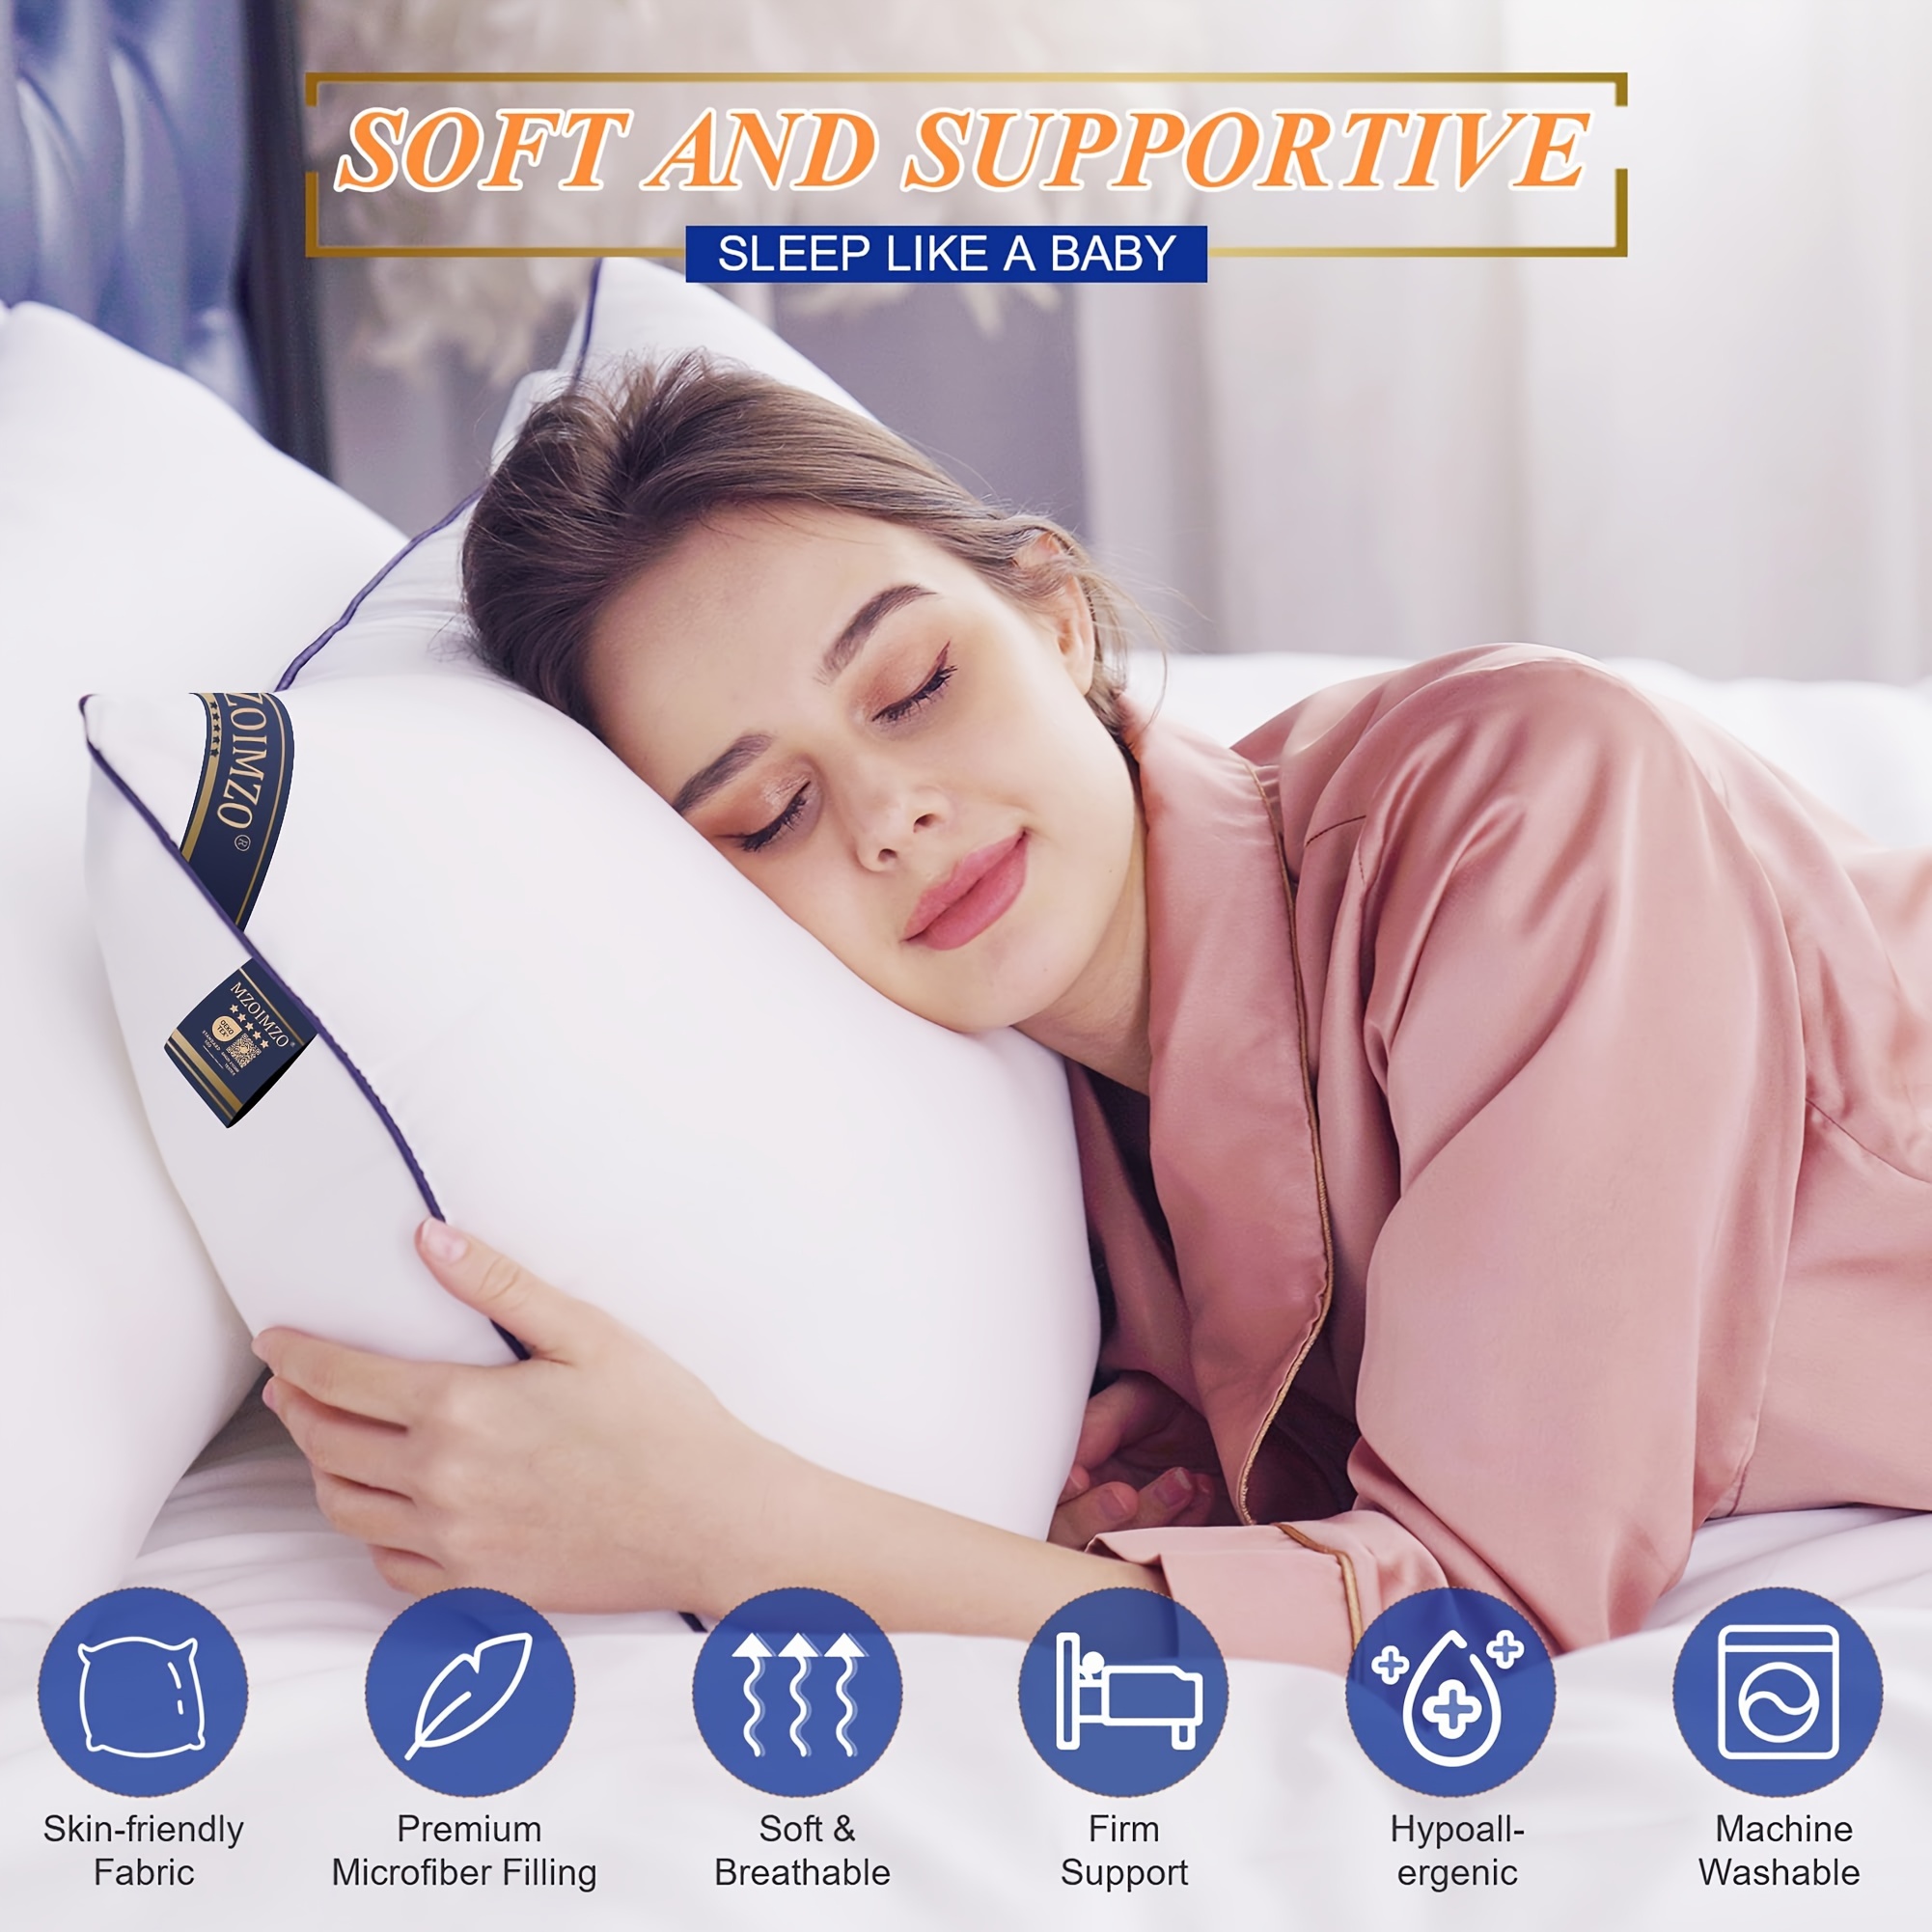 

Supportive Firm Bed Pillows For Sleeping- Standard Size, Set Of 2, Cooling Hotel Quality With Premium Soft Down Alternative Fill For Back, Stomach Or Side Sleepers